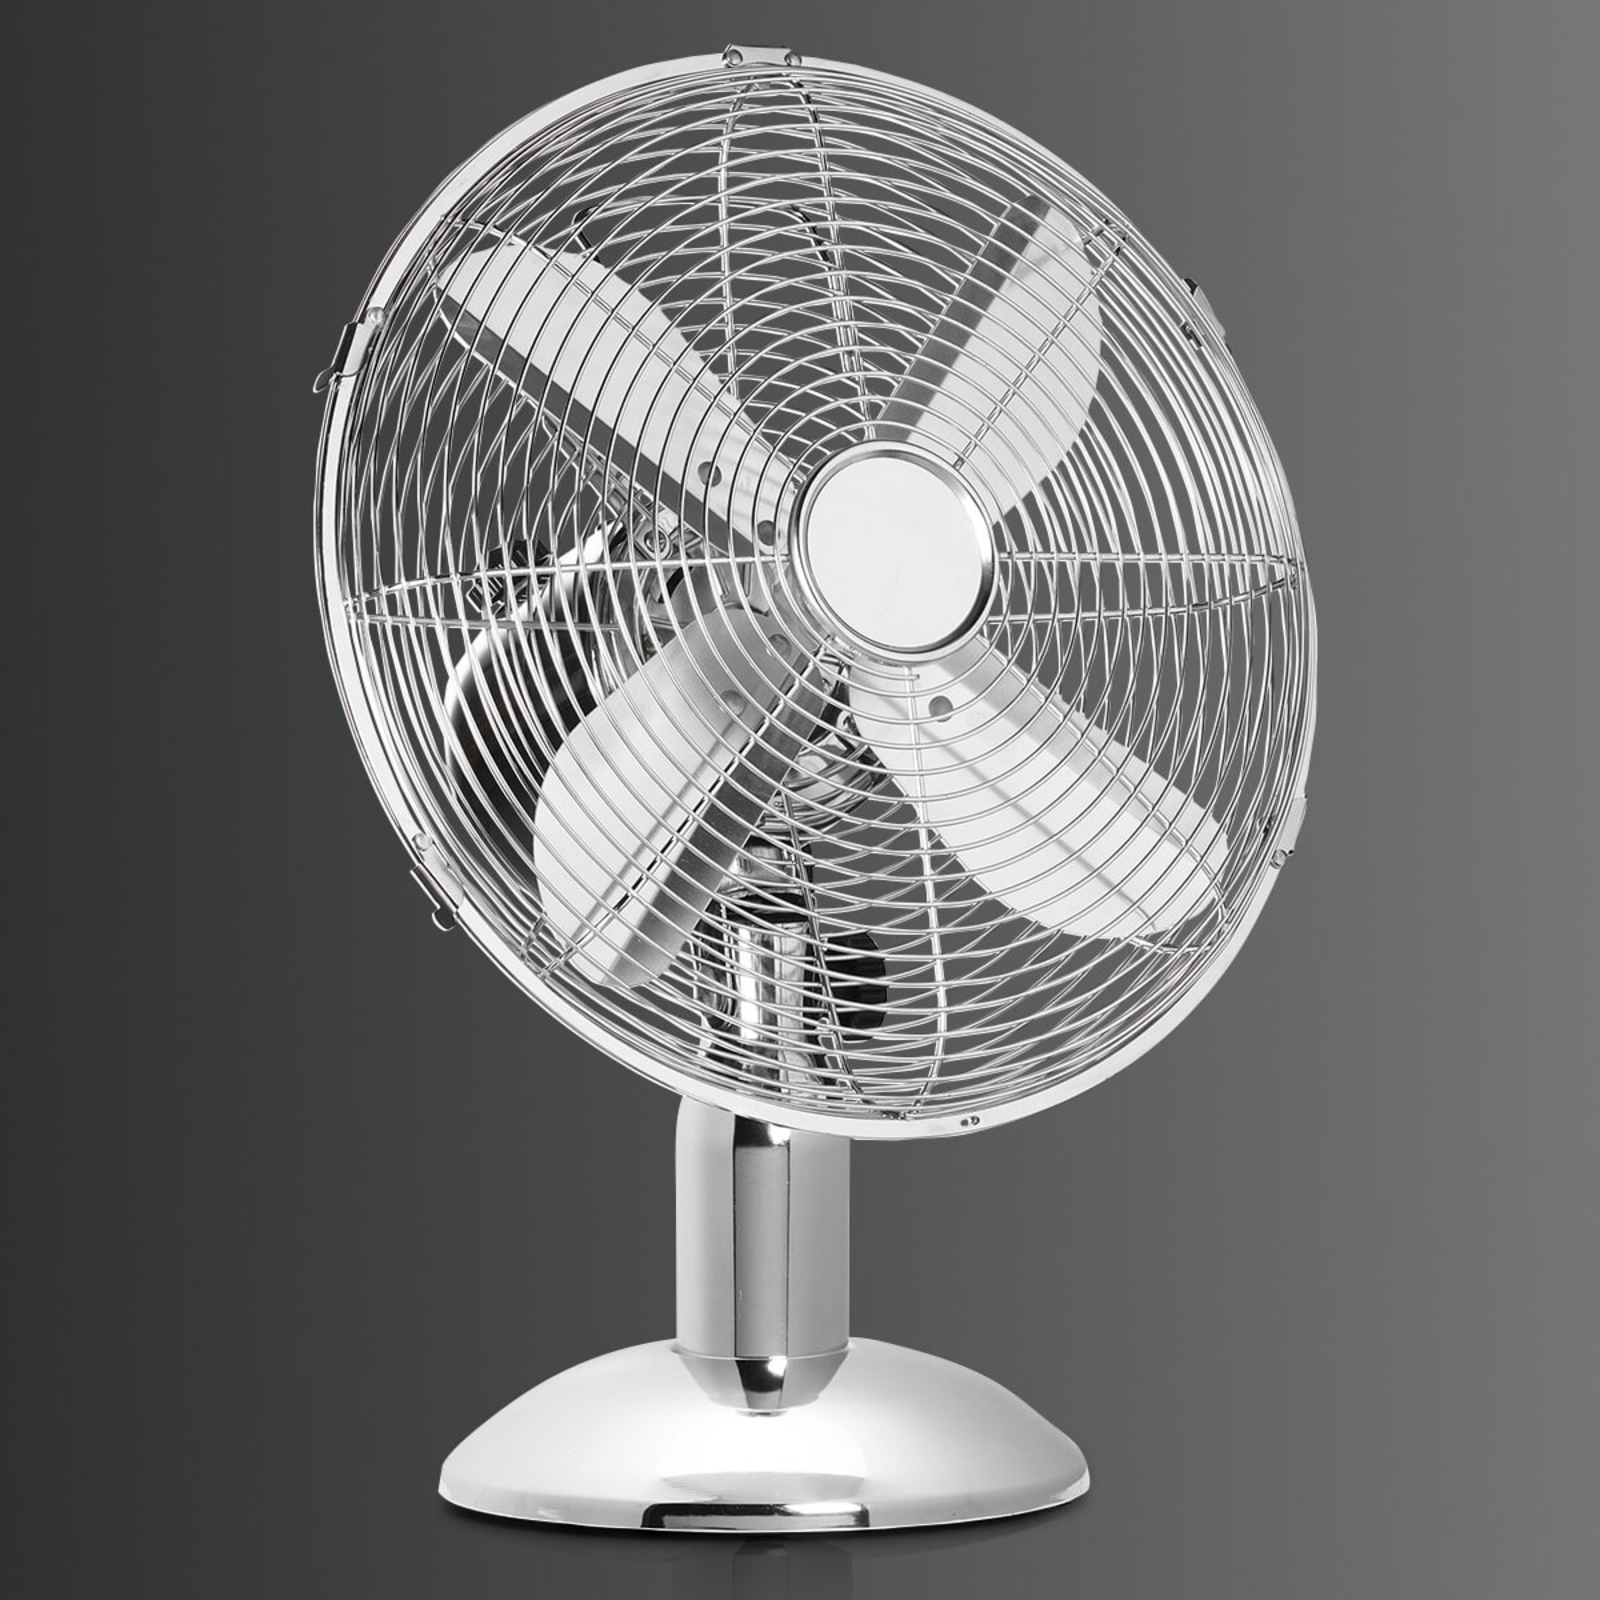 Three positions can be selected - VE5953 table fan